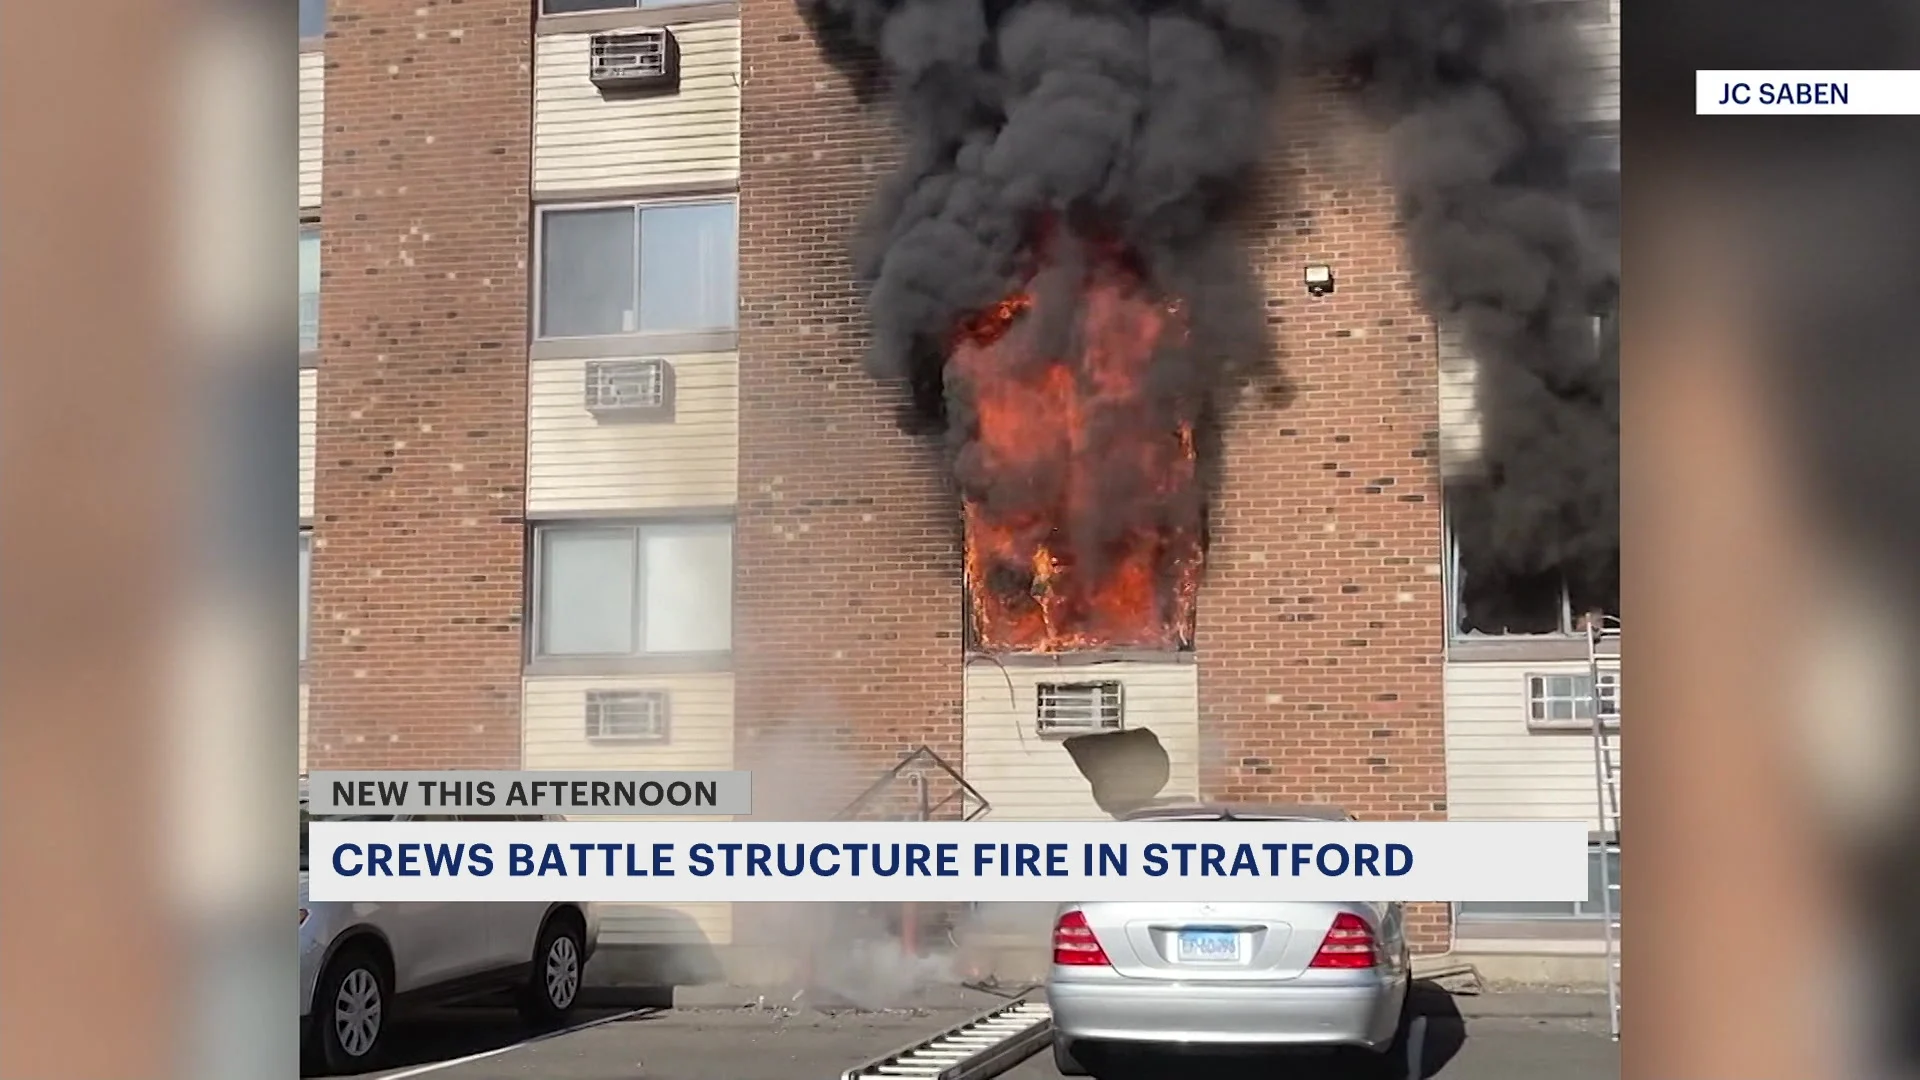  Caught on camera: Fire billows from Stratford apartment building